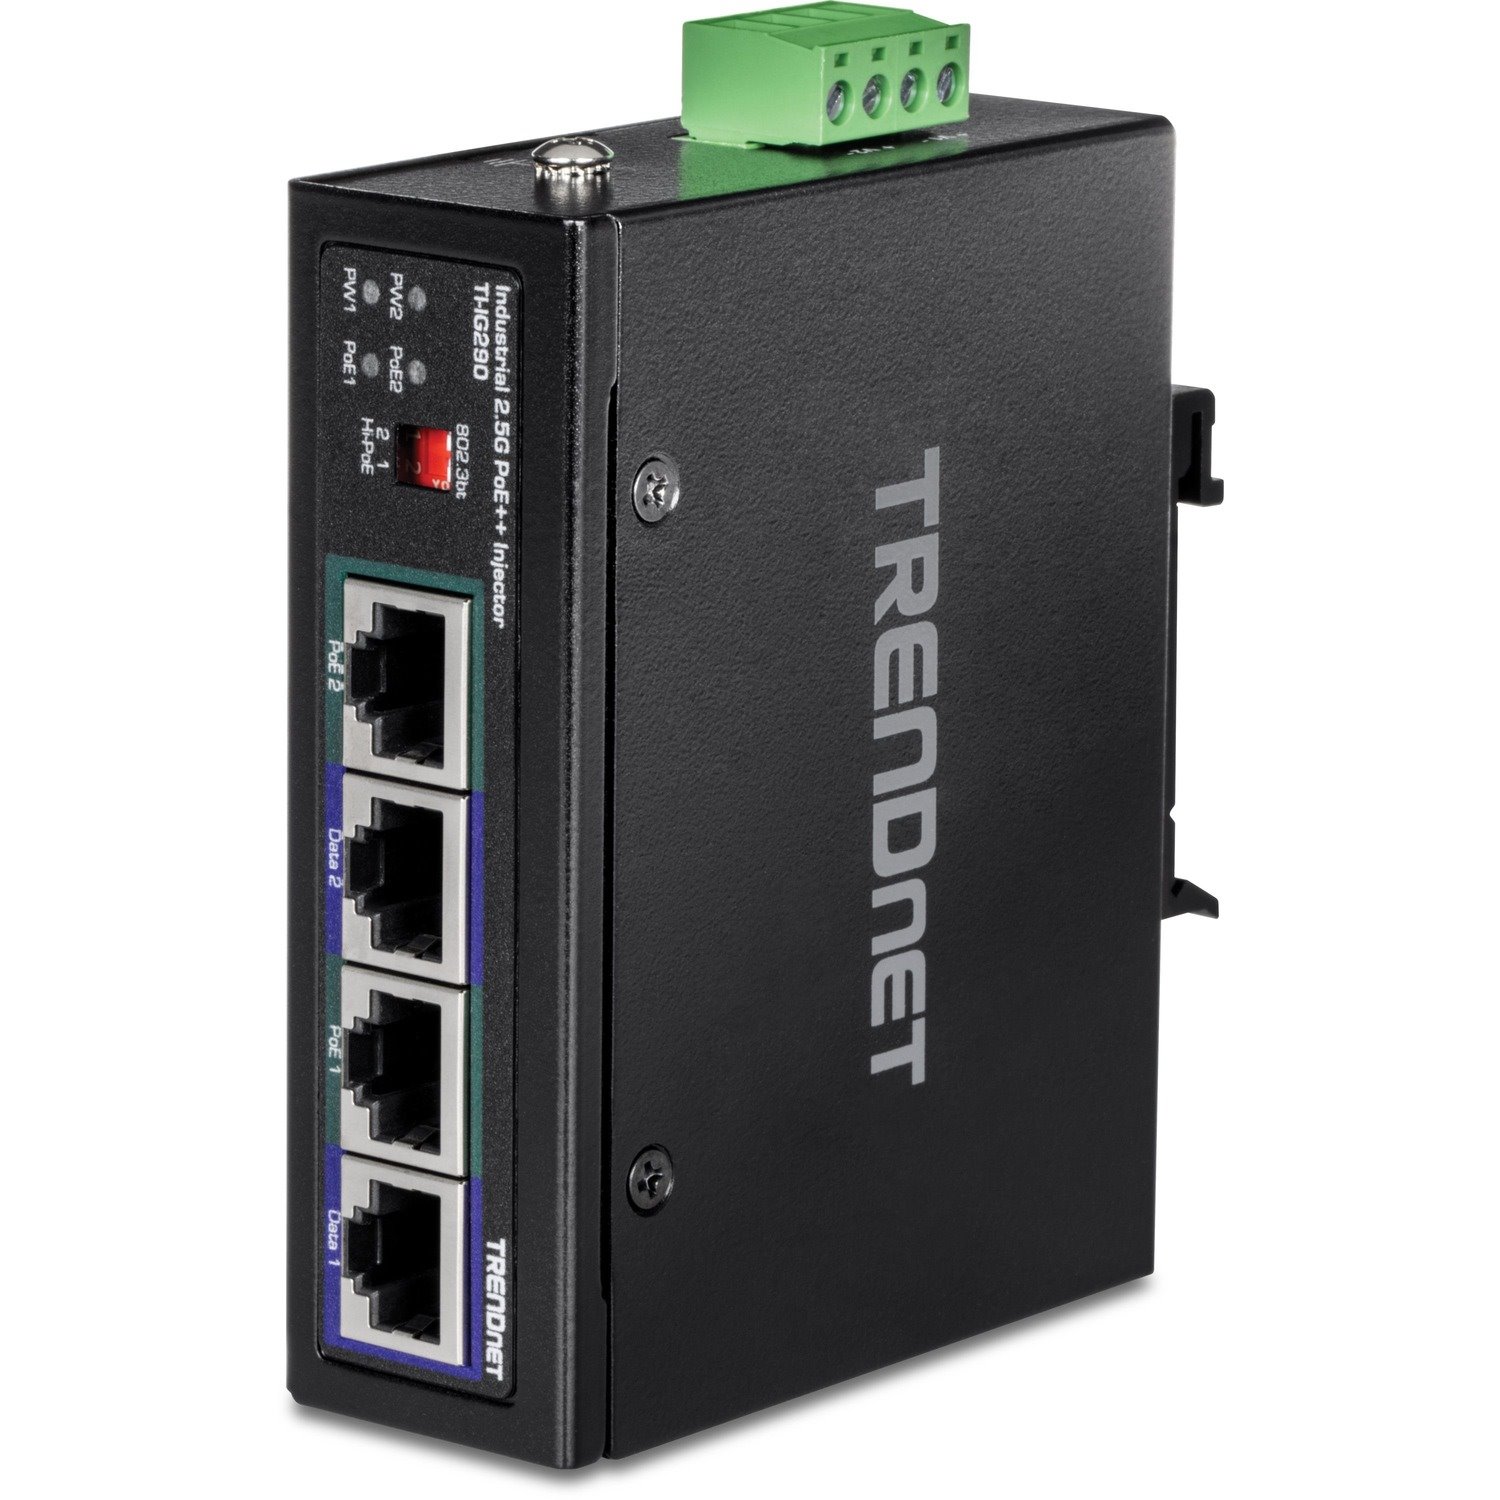 TRENDnet 95W 2-Port Industrial 2.5G PoE++ Injector, Supports PoE IEEE 802.3af, PoE+ IEEE 802.3at, And PoE++ IEEE 802.3bt, Not Compatible With Passive PoE Devices, Black, TI-IG290